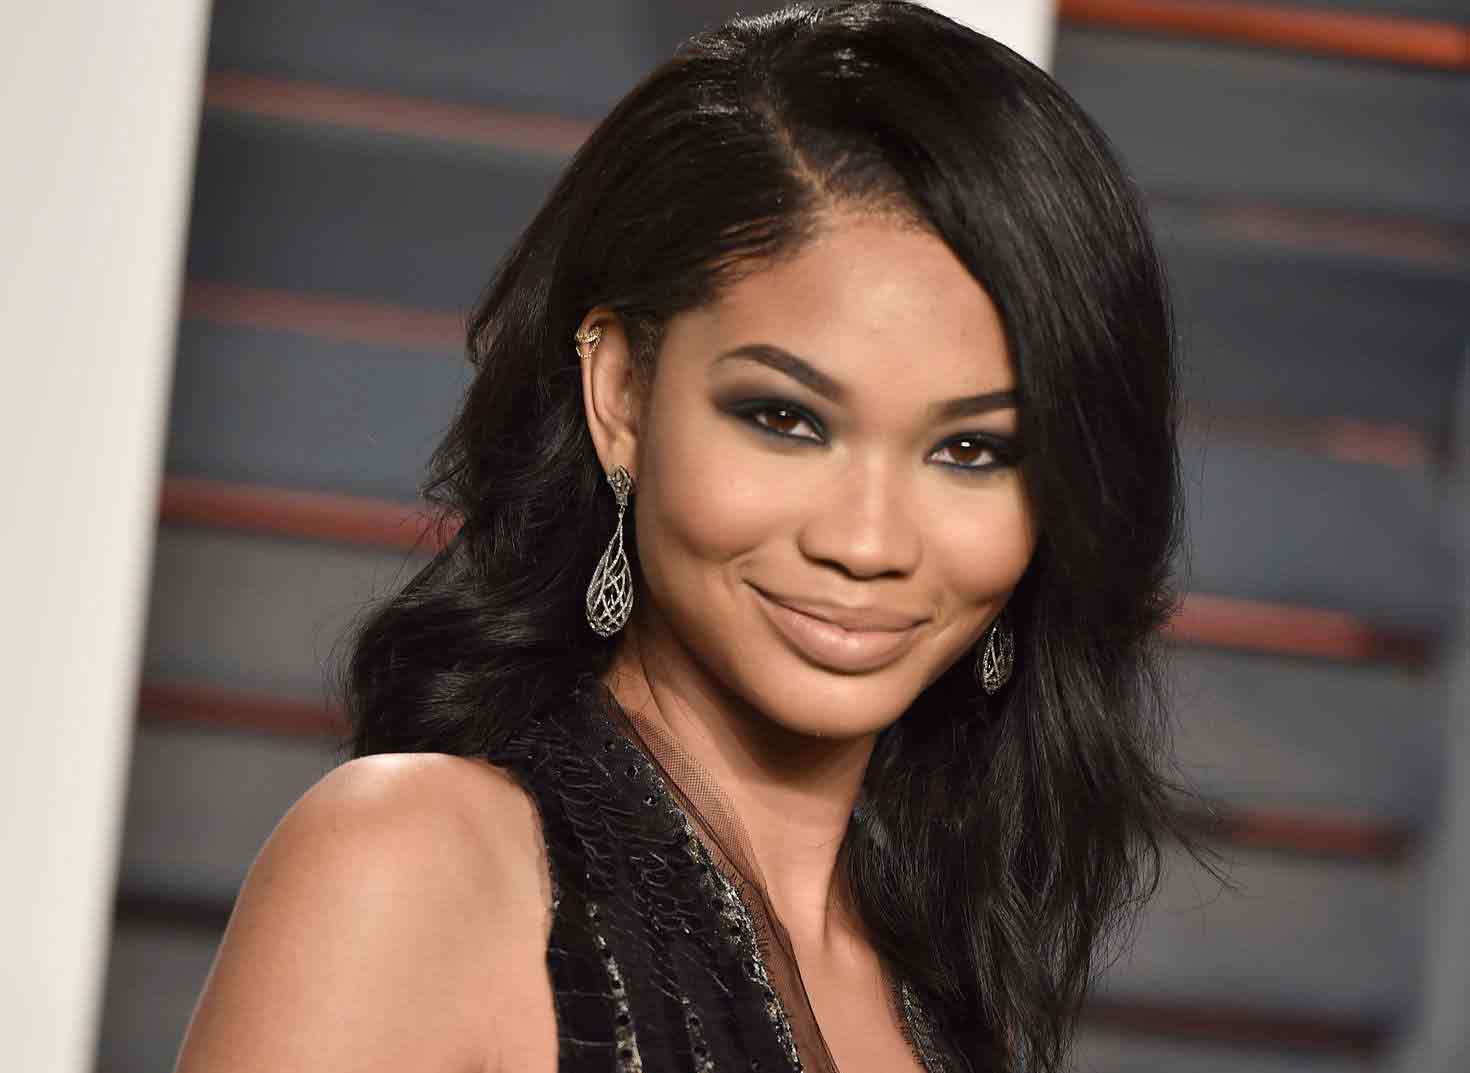 What is Chanel Iman’s net worth?